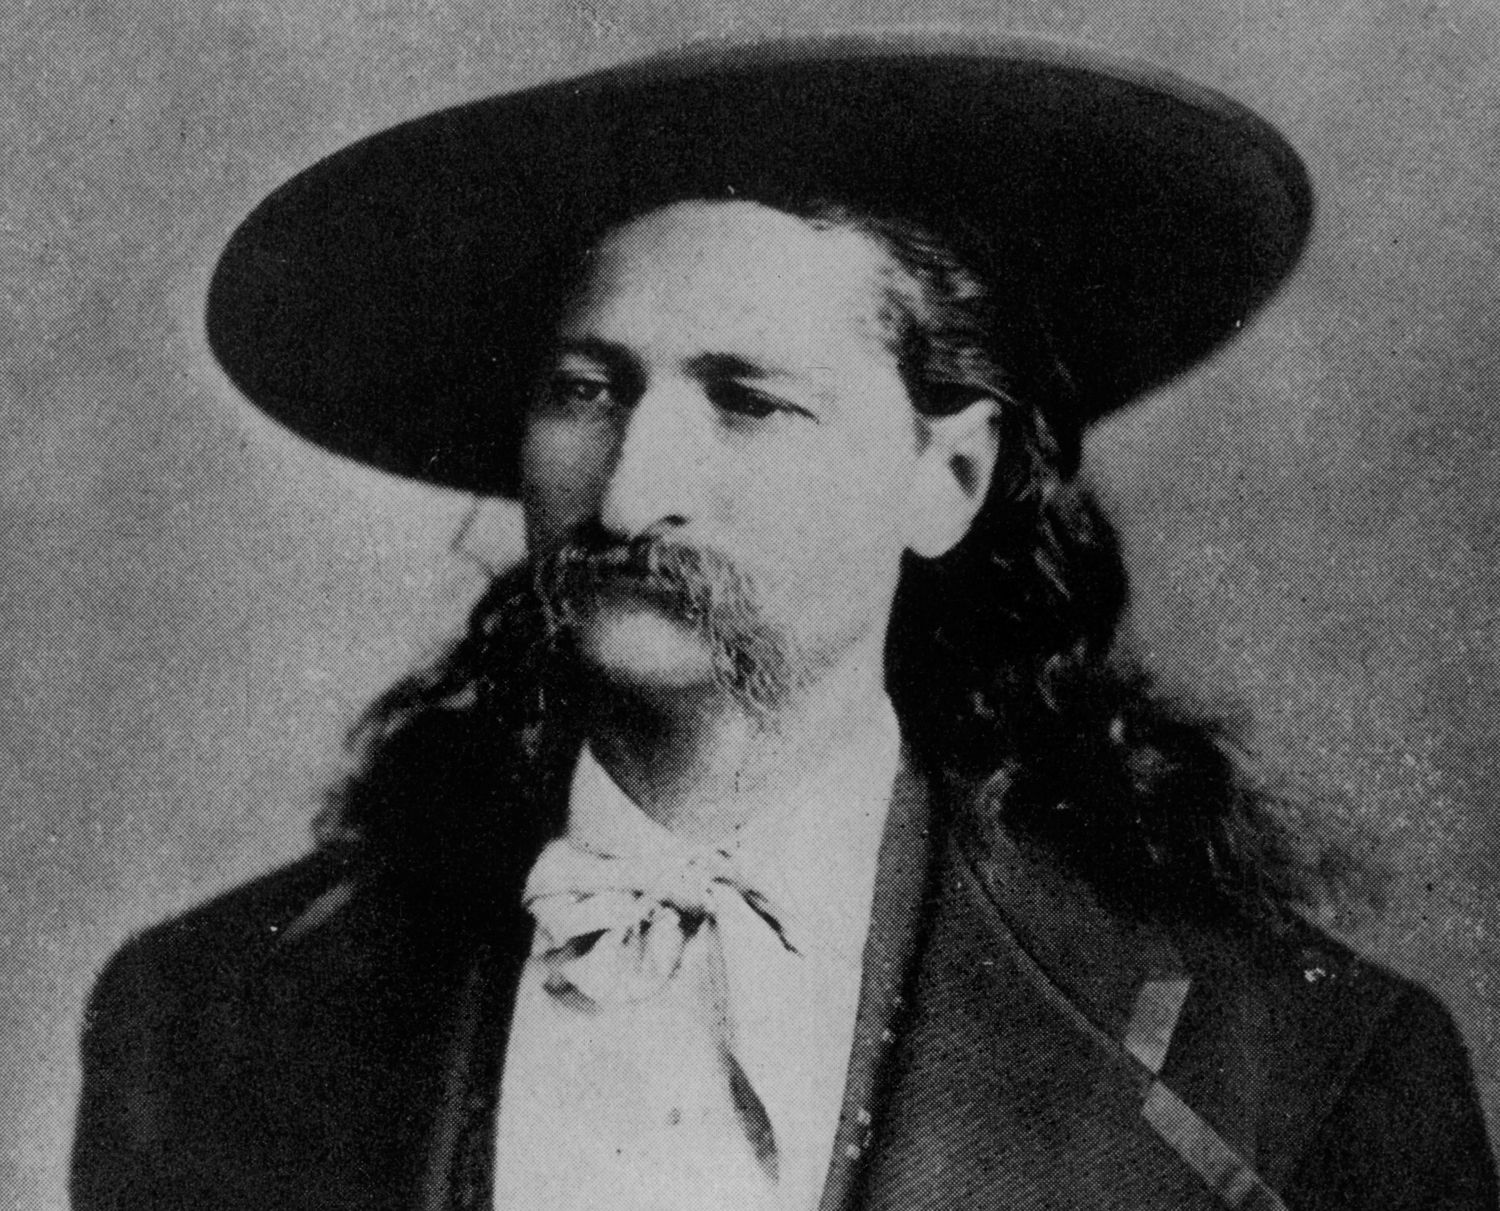 who was calamity jane of the american old west